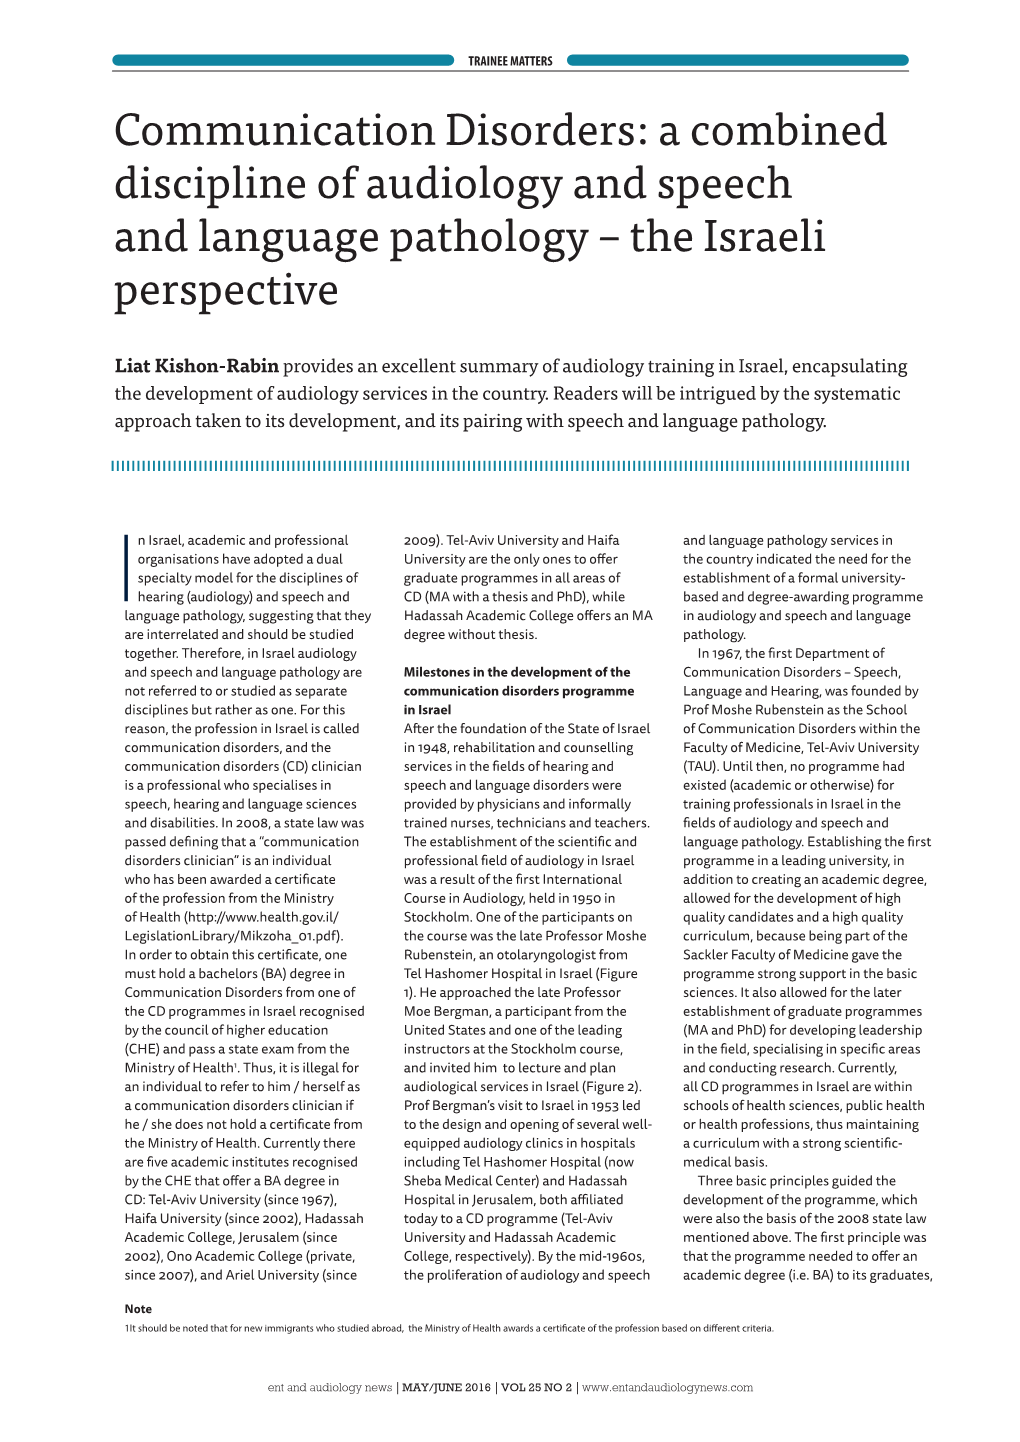 Communication Disorders: a Combined Discipline of Audiology and Speech and Language Pathology – the Israeli Perspective